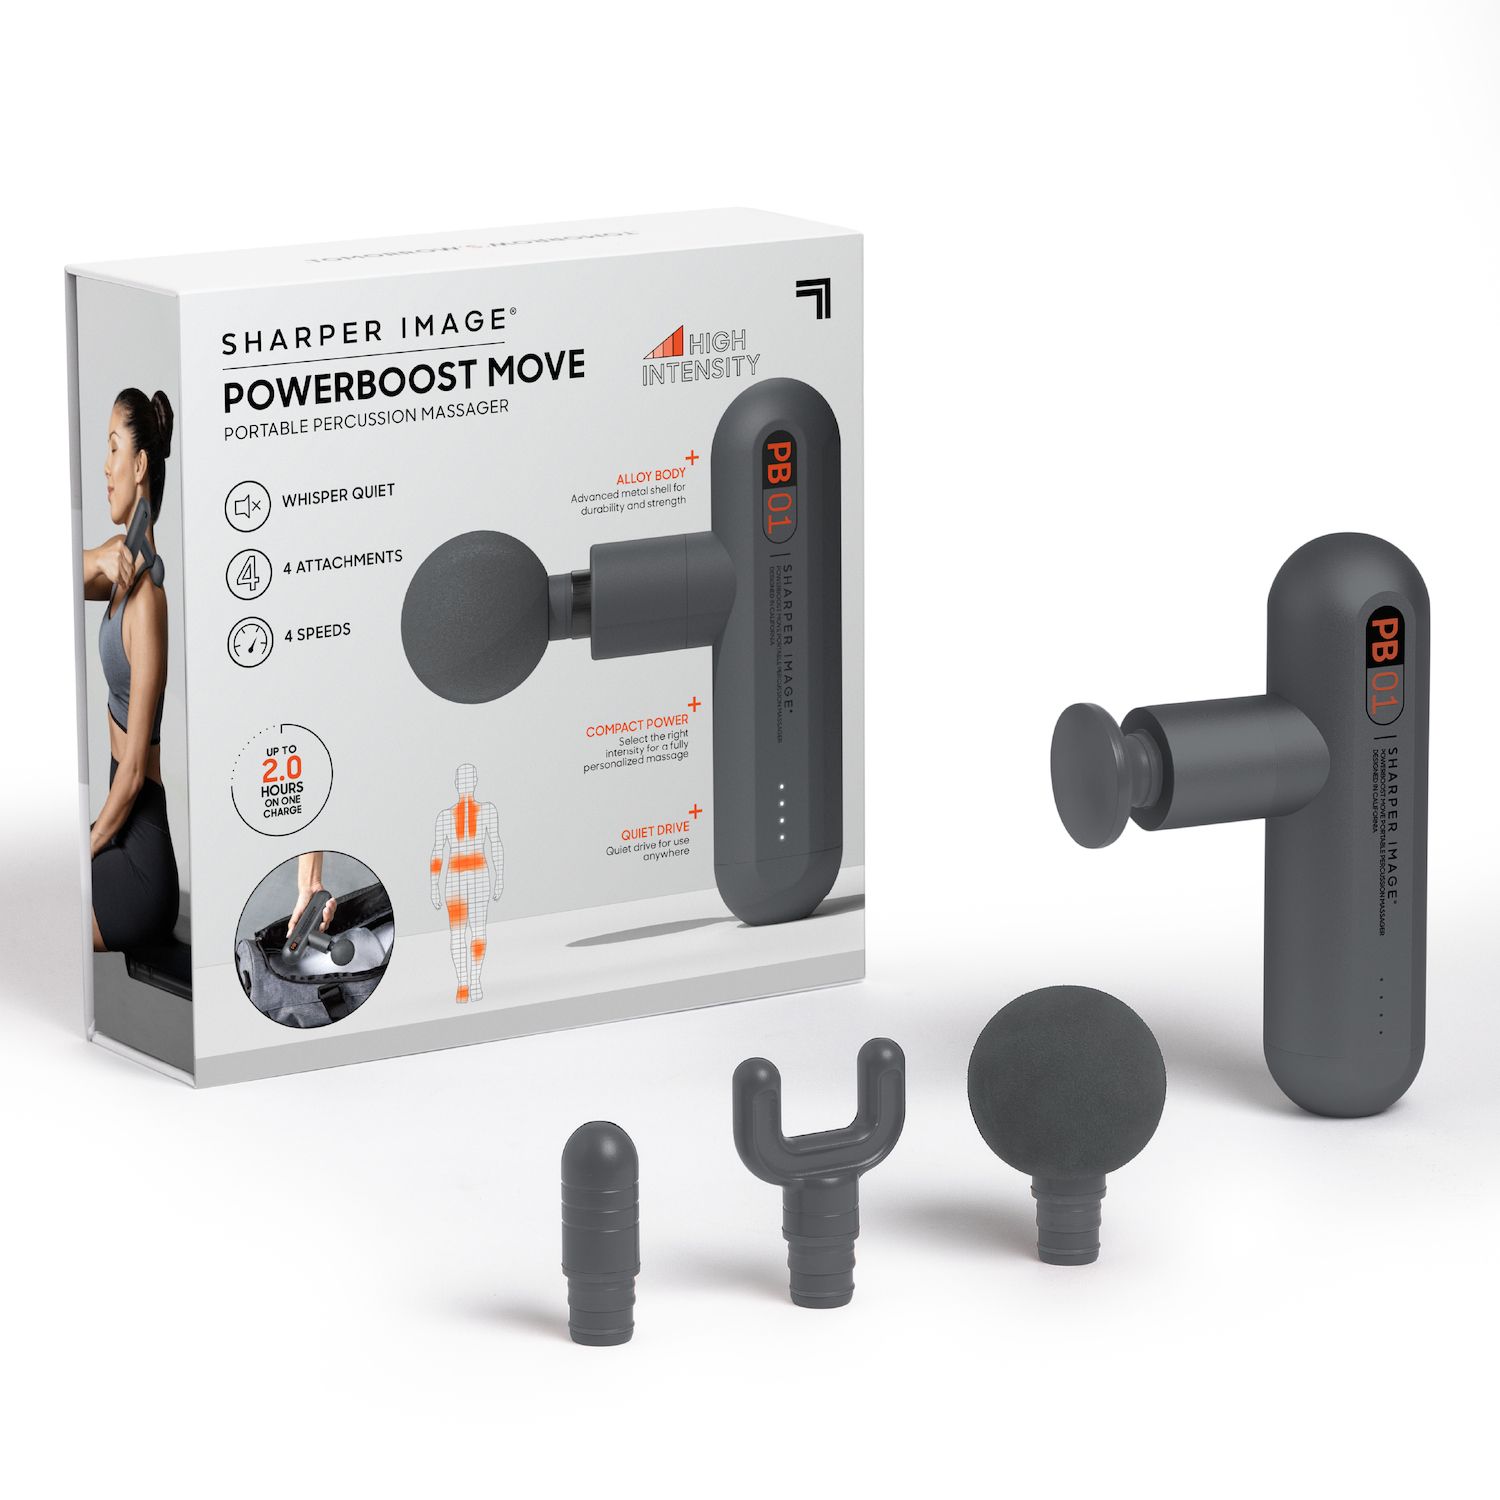 Sharper Image Powerboost Move Deep Tissue Travel Percussion Massager - $25.99